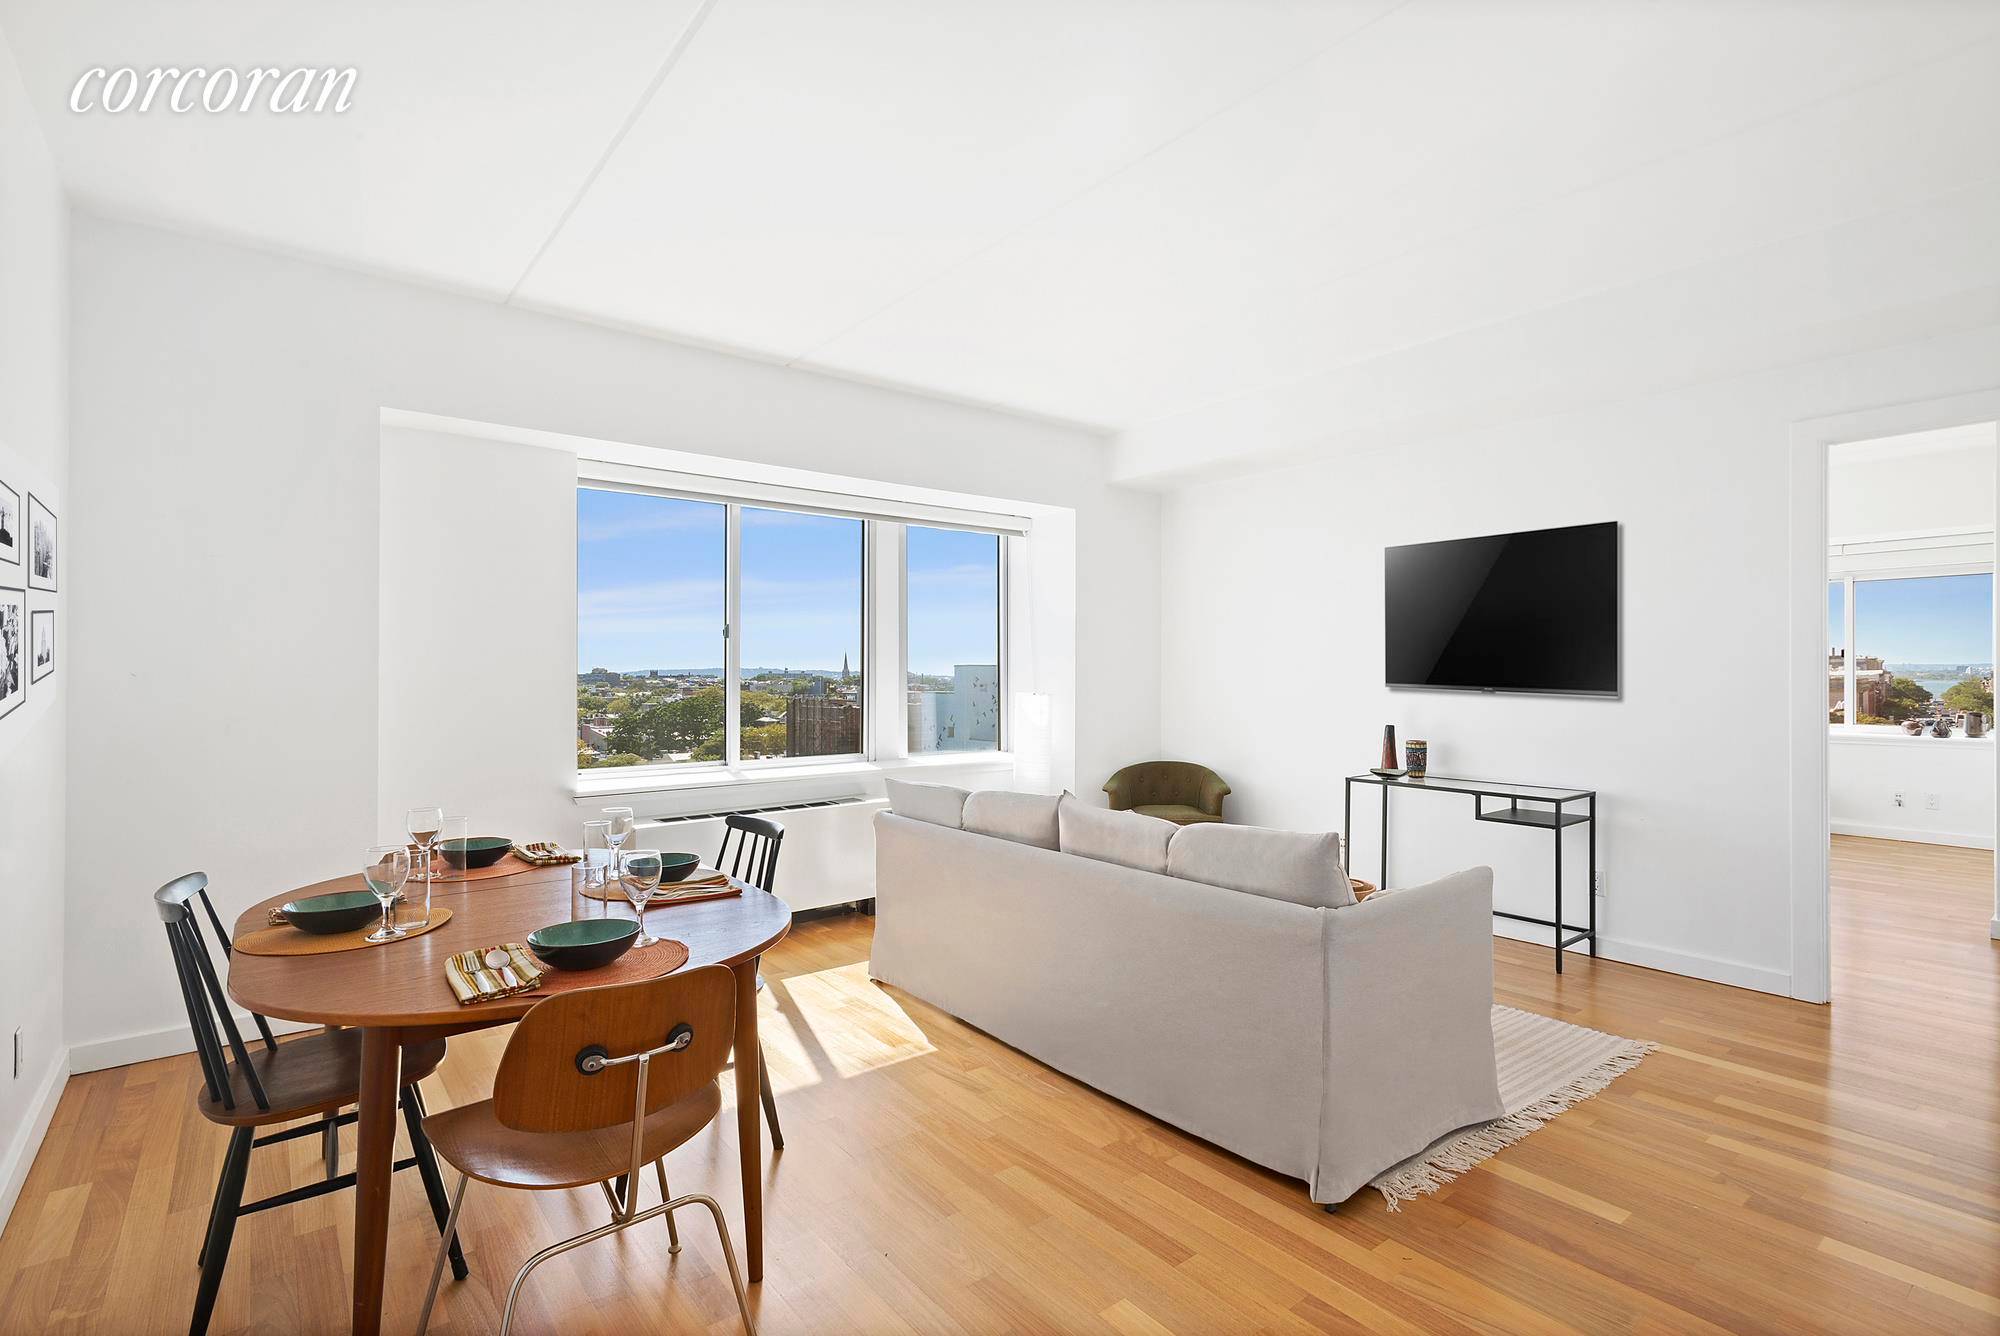 87 Smith Street 8B is a bright, modern Boerum Hill two bedroom two bathroom condo with a wide open exposure for all day light and views you must see to ...